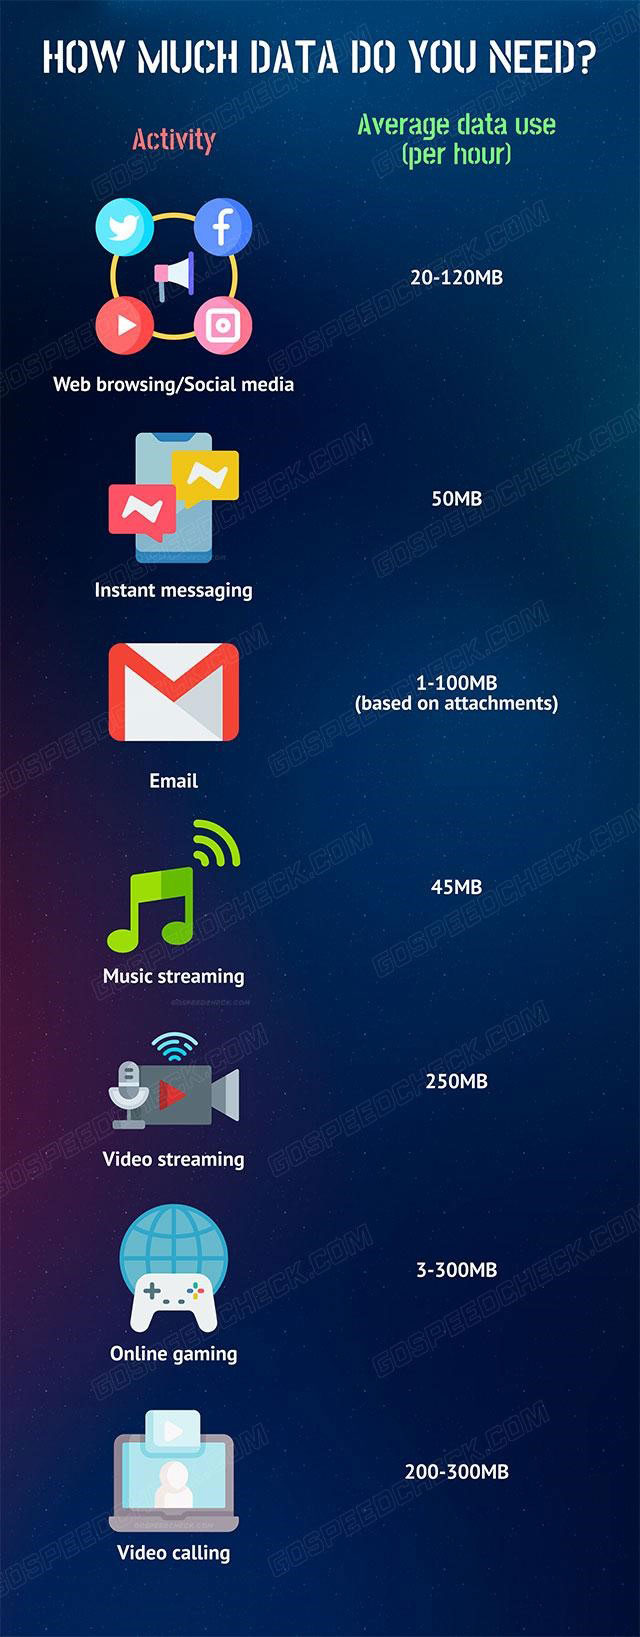 Data usage by activity